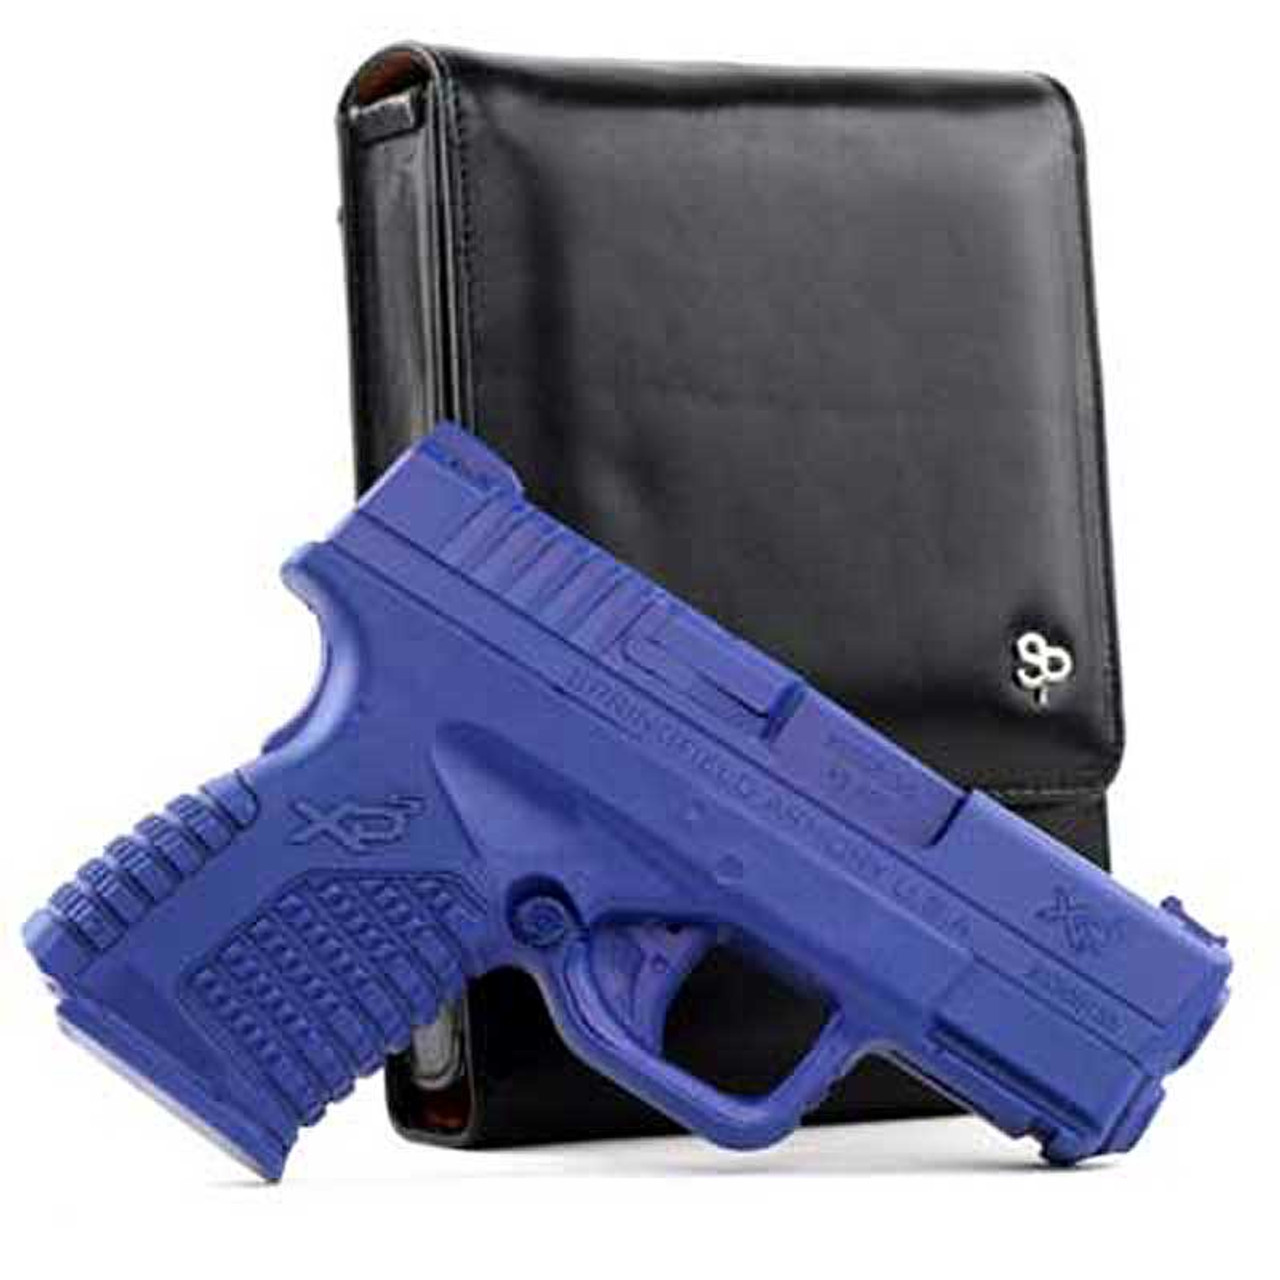 Springfield XDS 9mm Holster